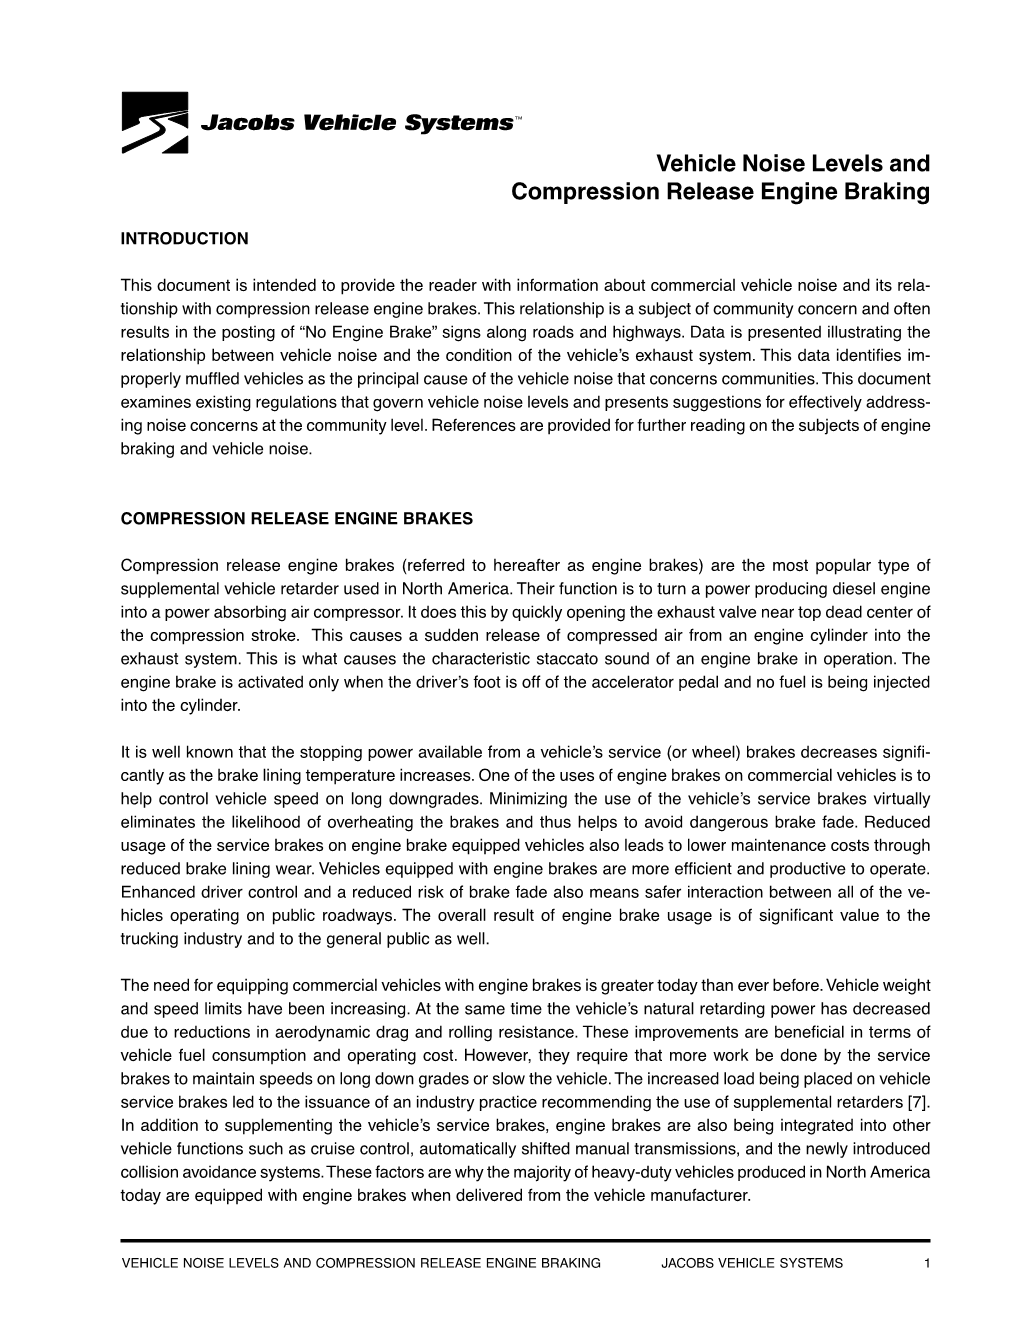 Vehicle Noise Levels and Compression Release Engine Braking